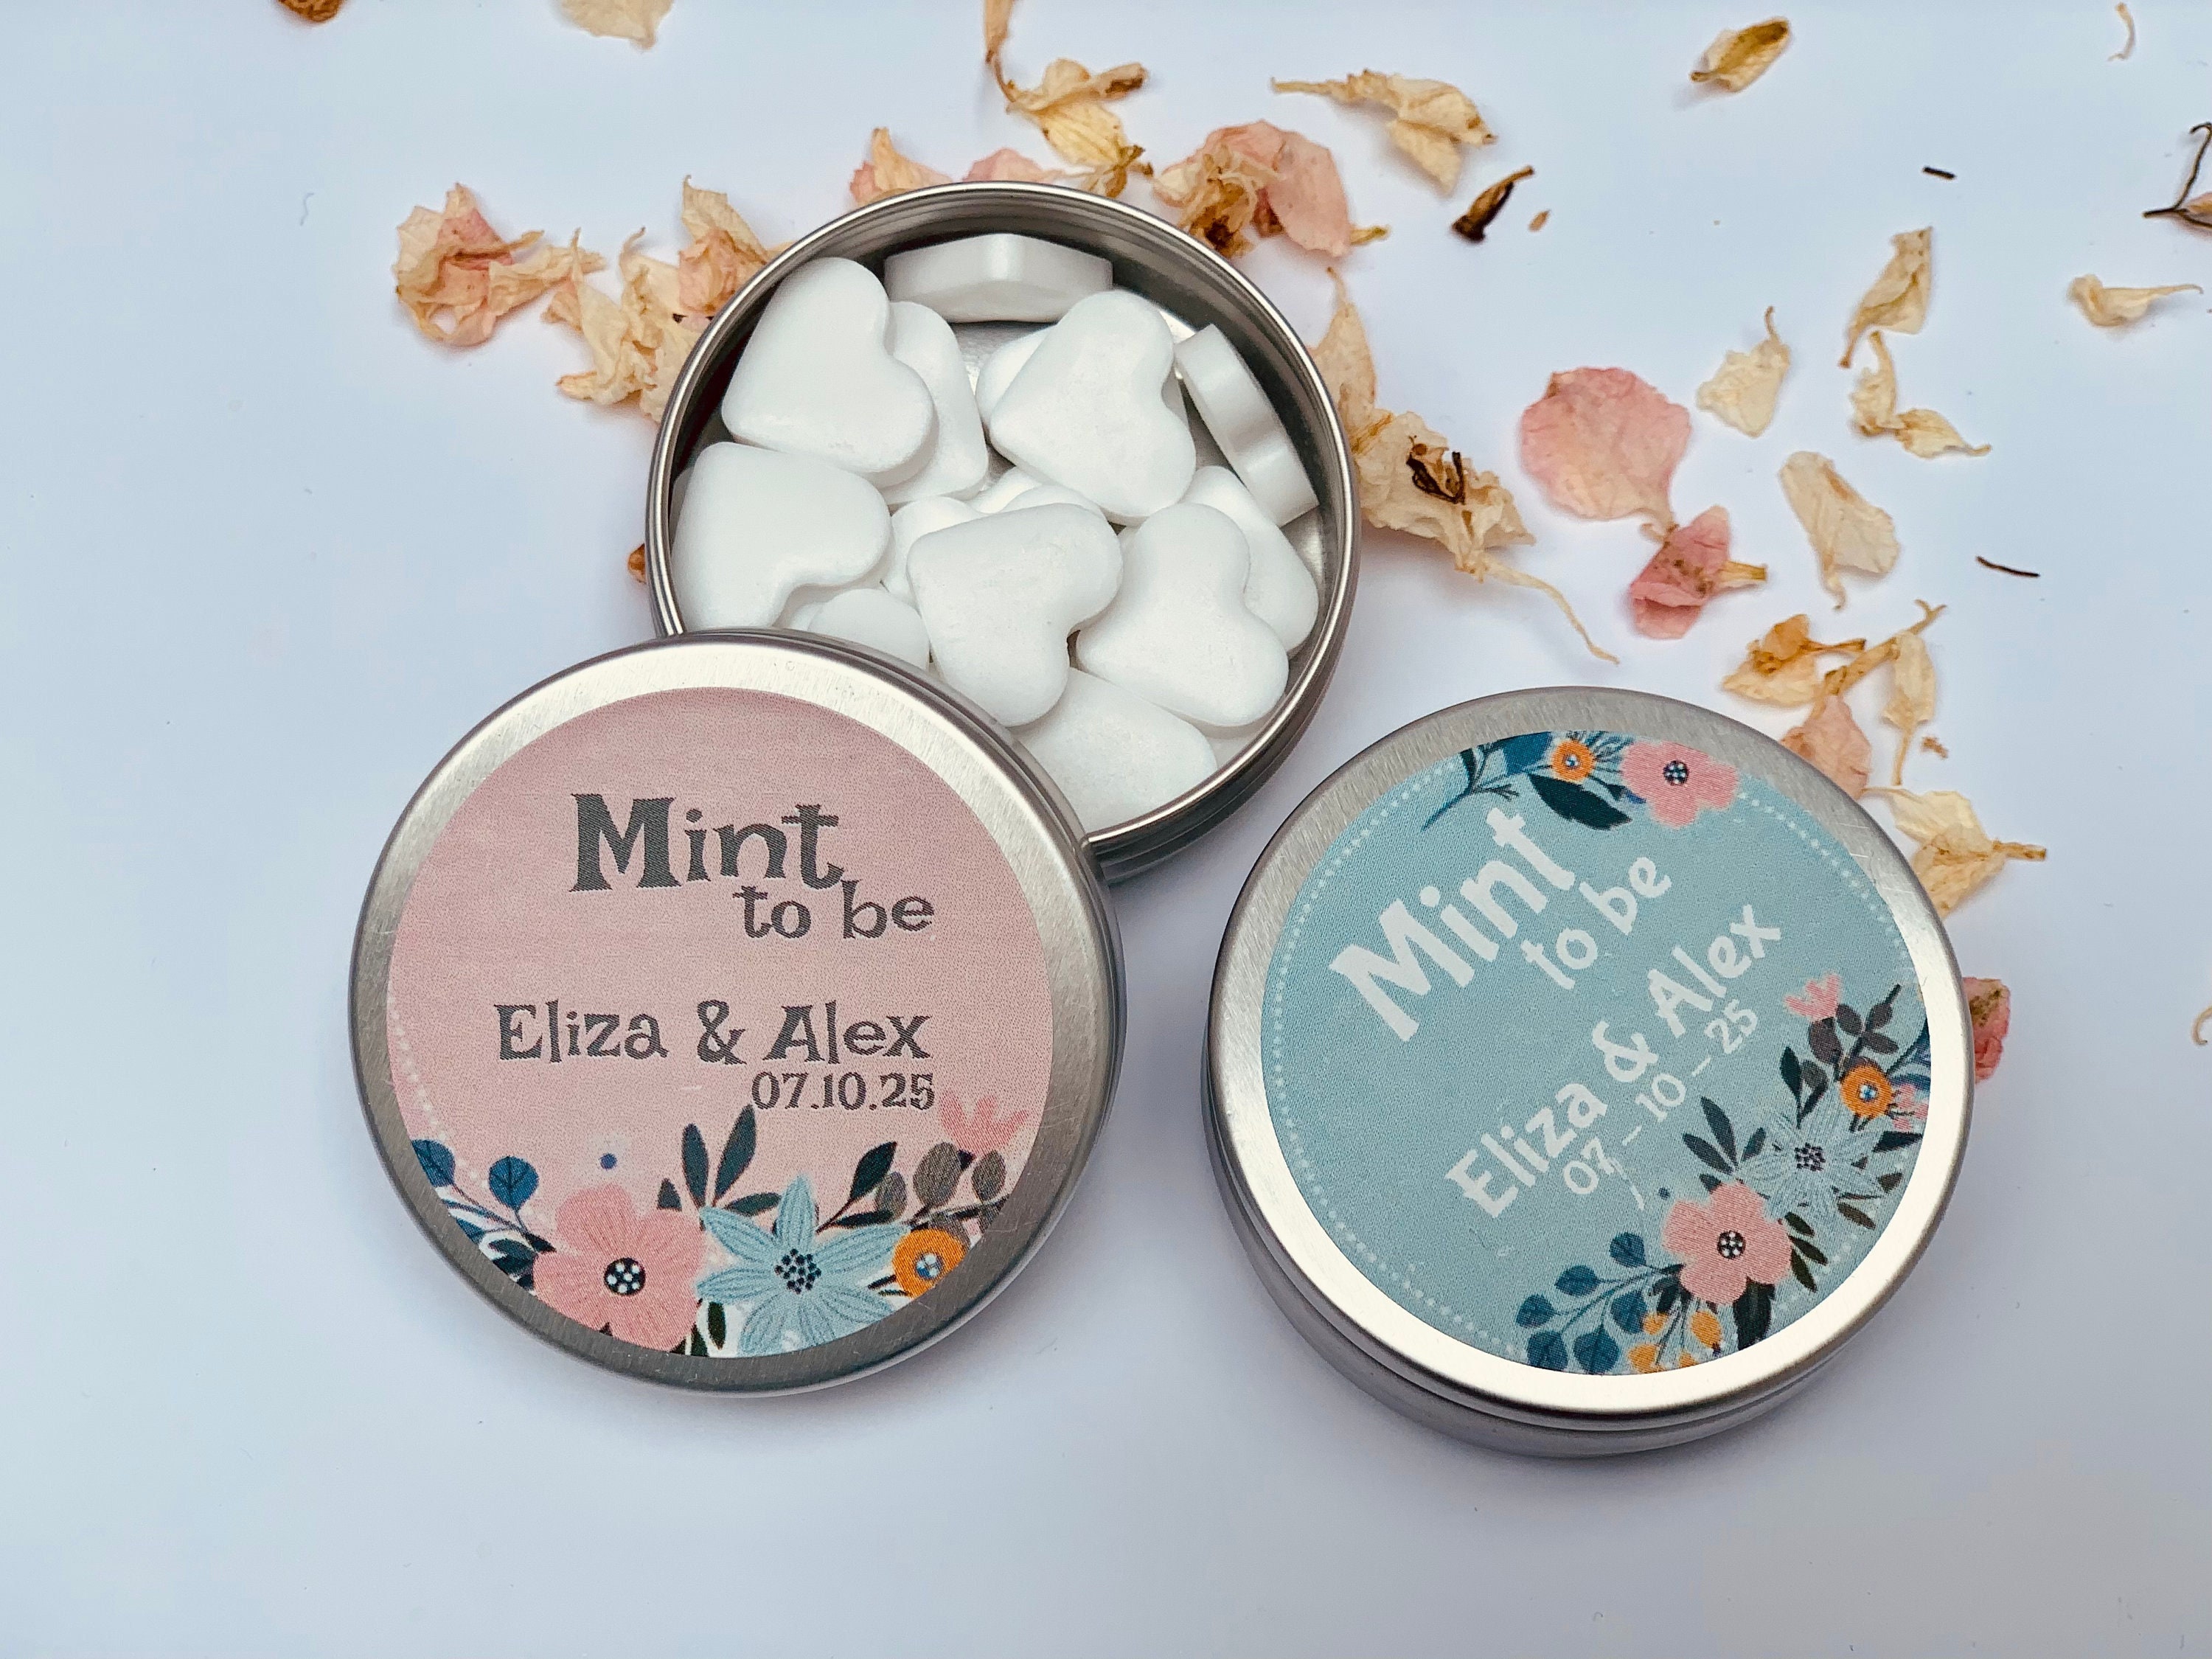 40-200 Personalized Heart Shaped Mint Tins - Wedding Shower Party Favors